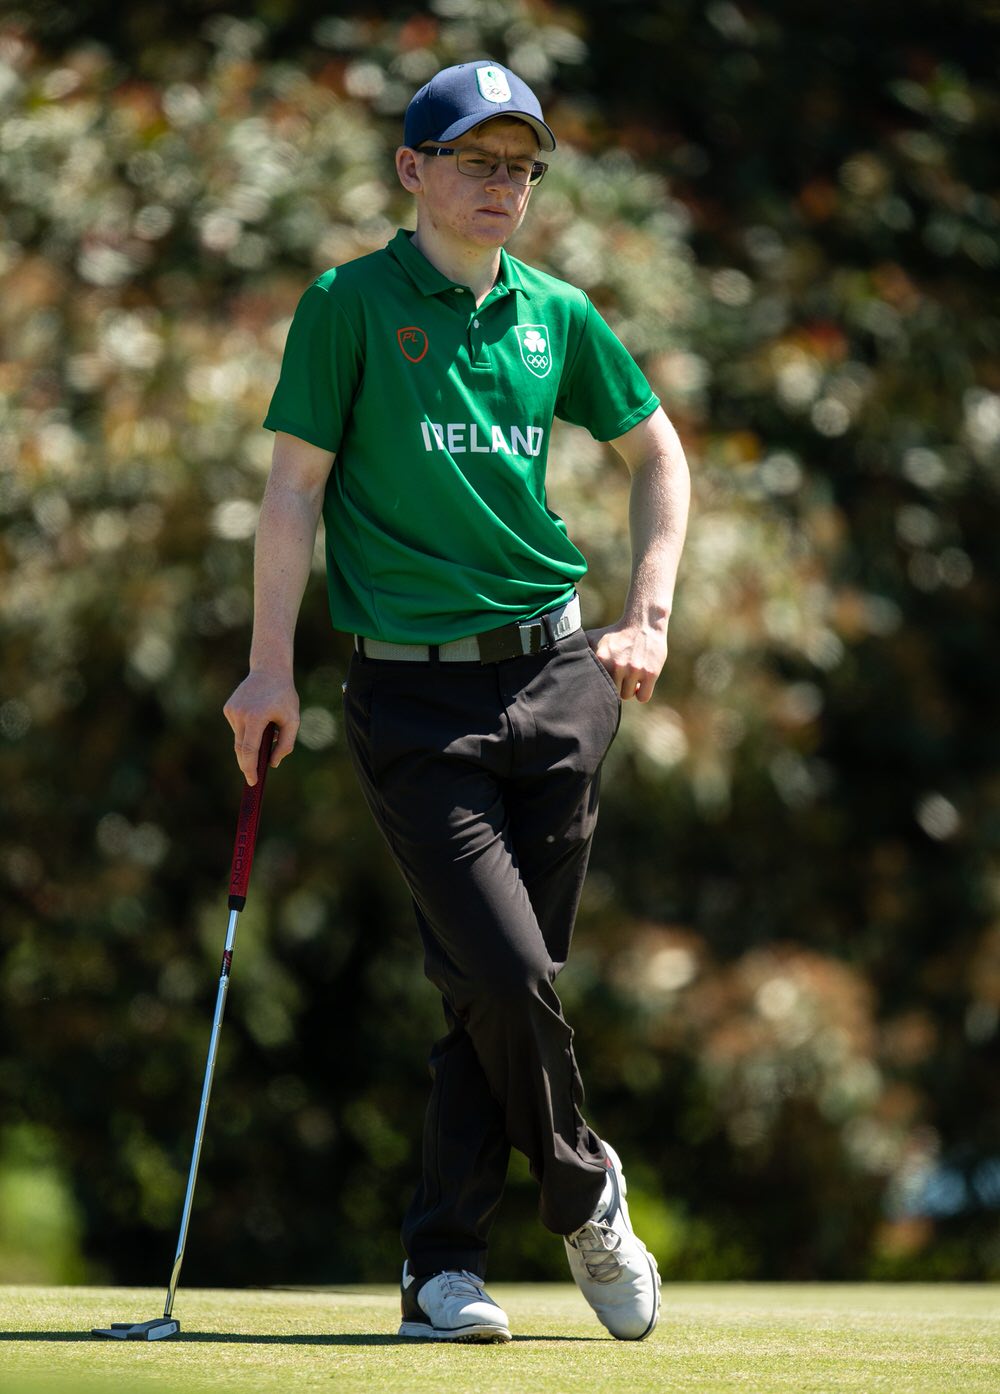  David Kitt IRL during the Golf Mixed Team Event at the Hurlingham Club during The Youth Olympic Games, Buenos Aires, Argentina, Monday 15th October 2018. Photo: Joe Toth for OIS/IOC. Handout image supplied by OIS/IOC 